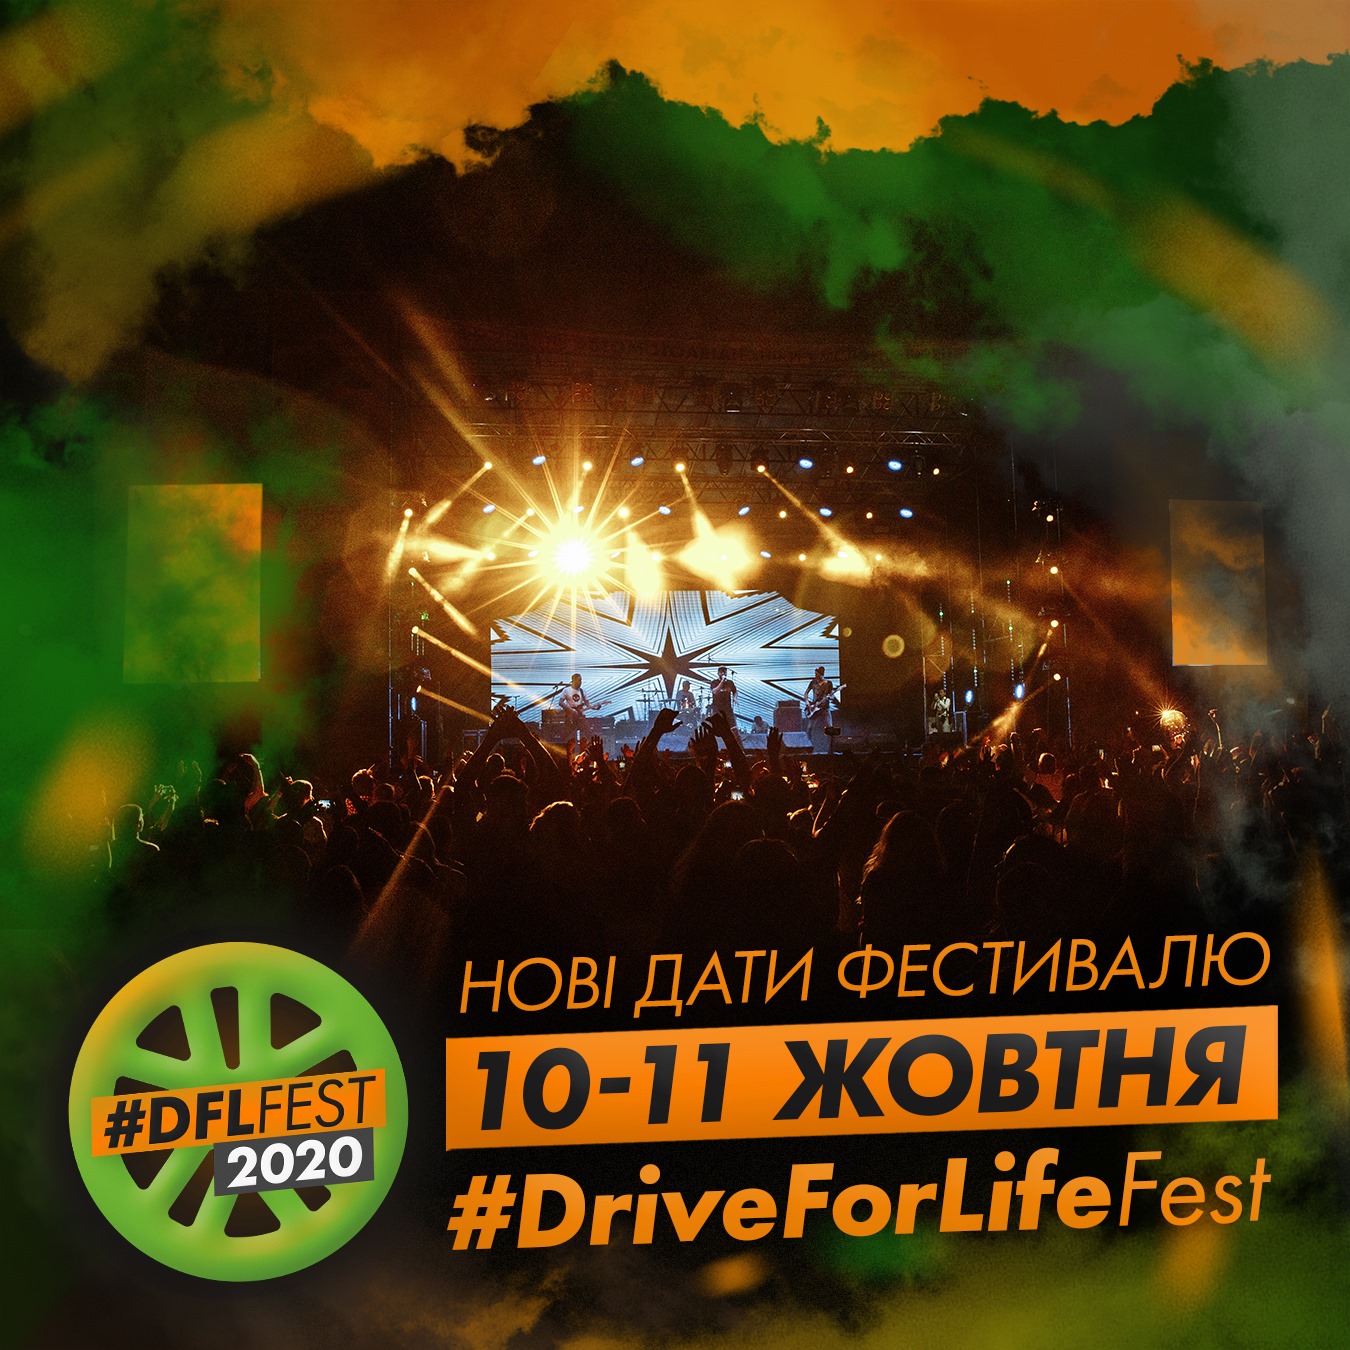 "Drive for Life"